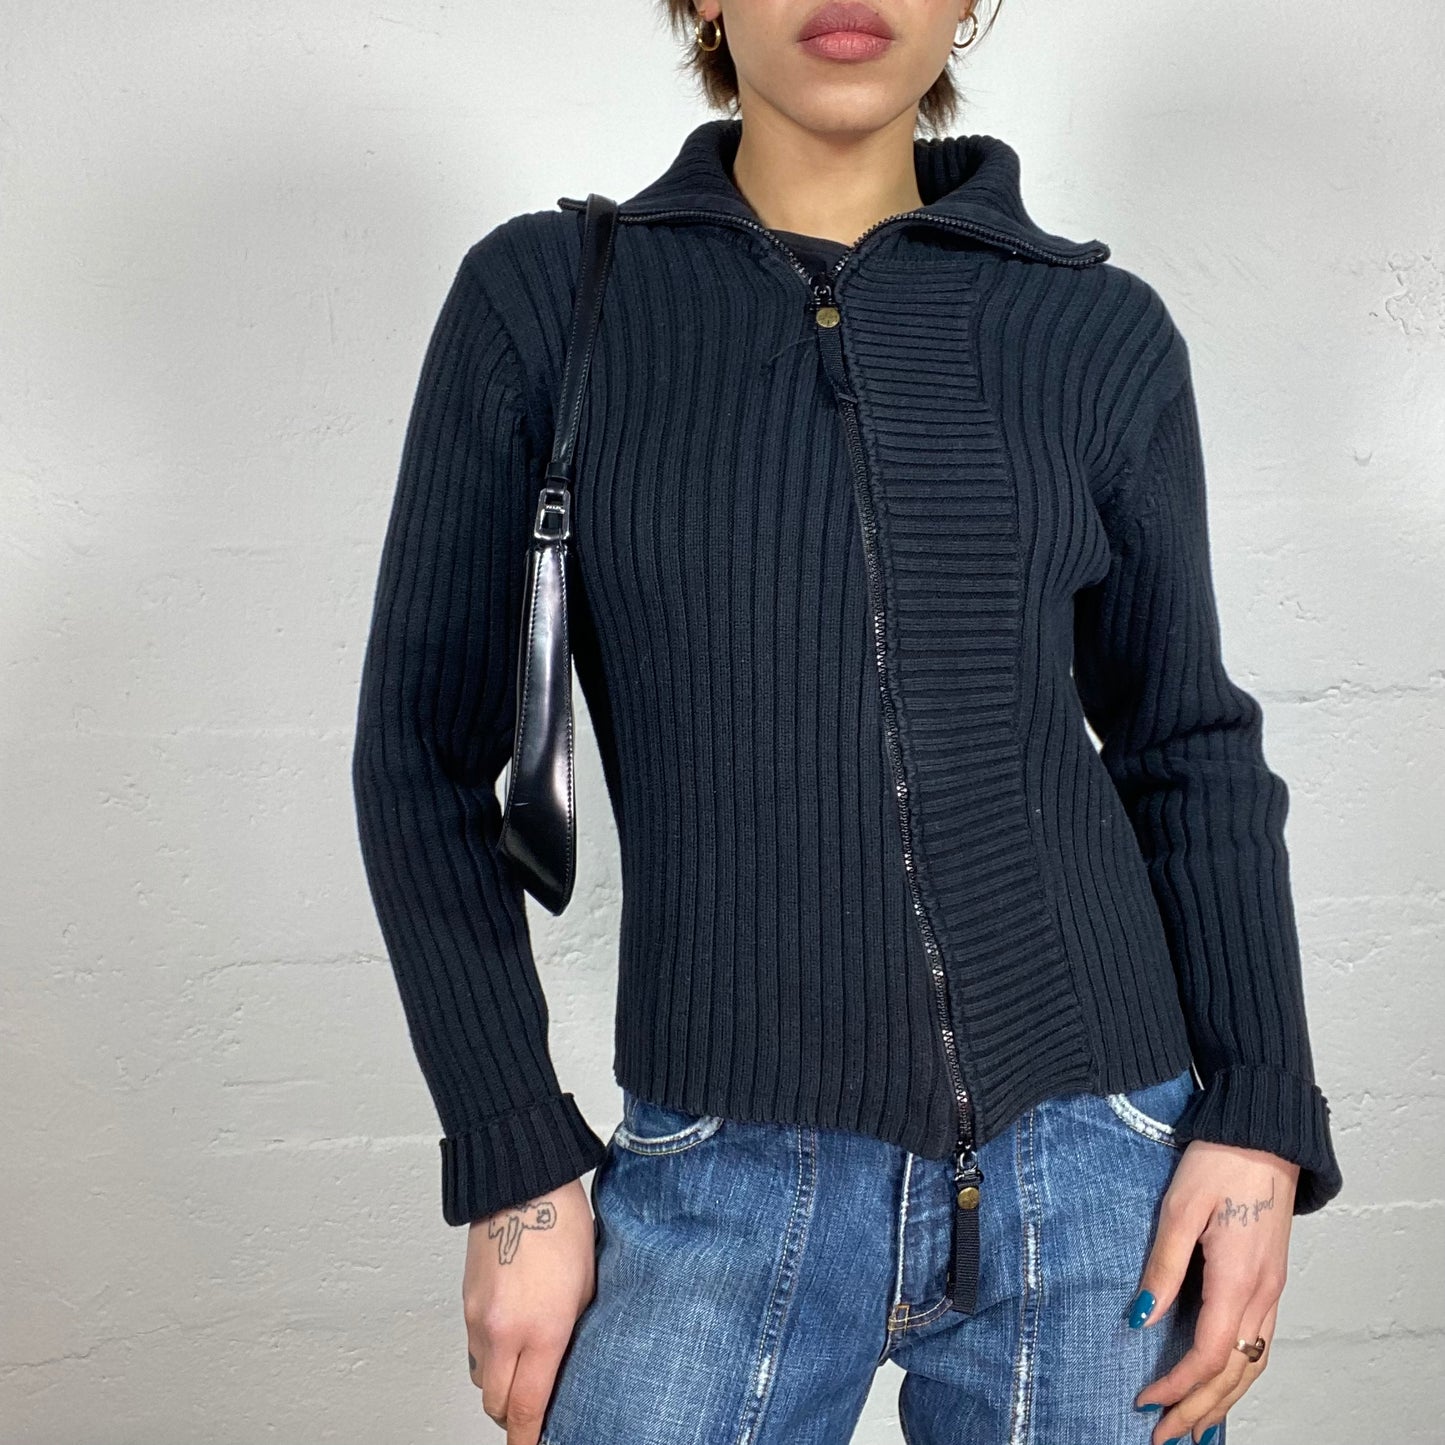 Vintage 2000's Sporty Black Asymmetric Zip Up Knitted Sweater (M)